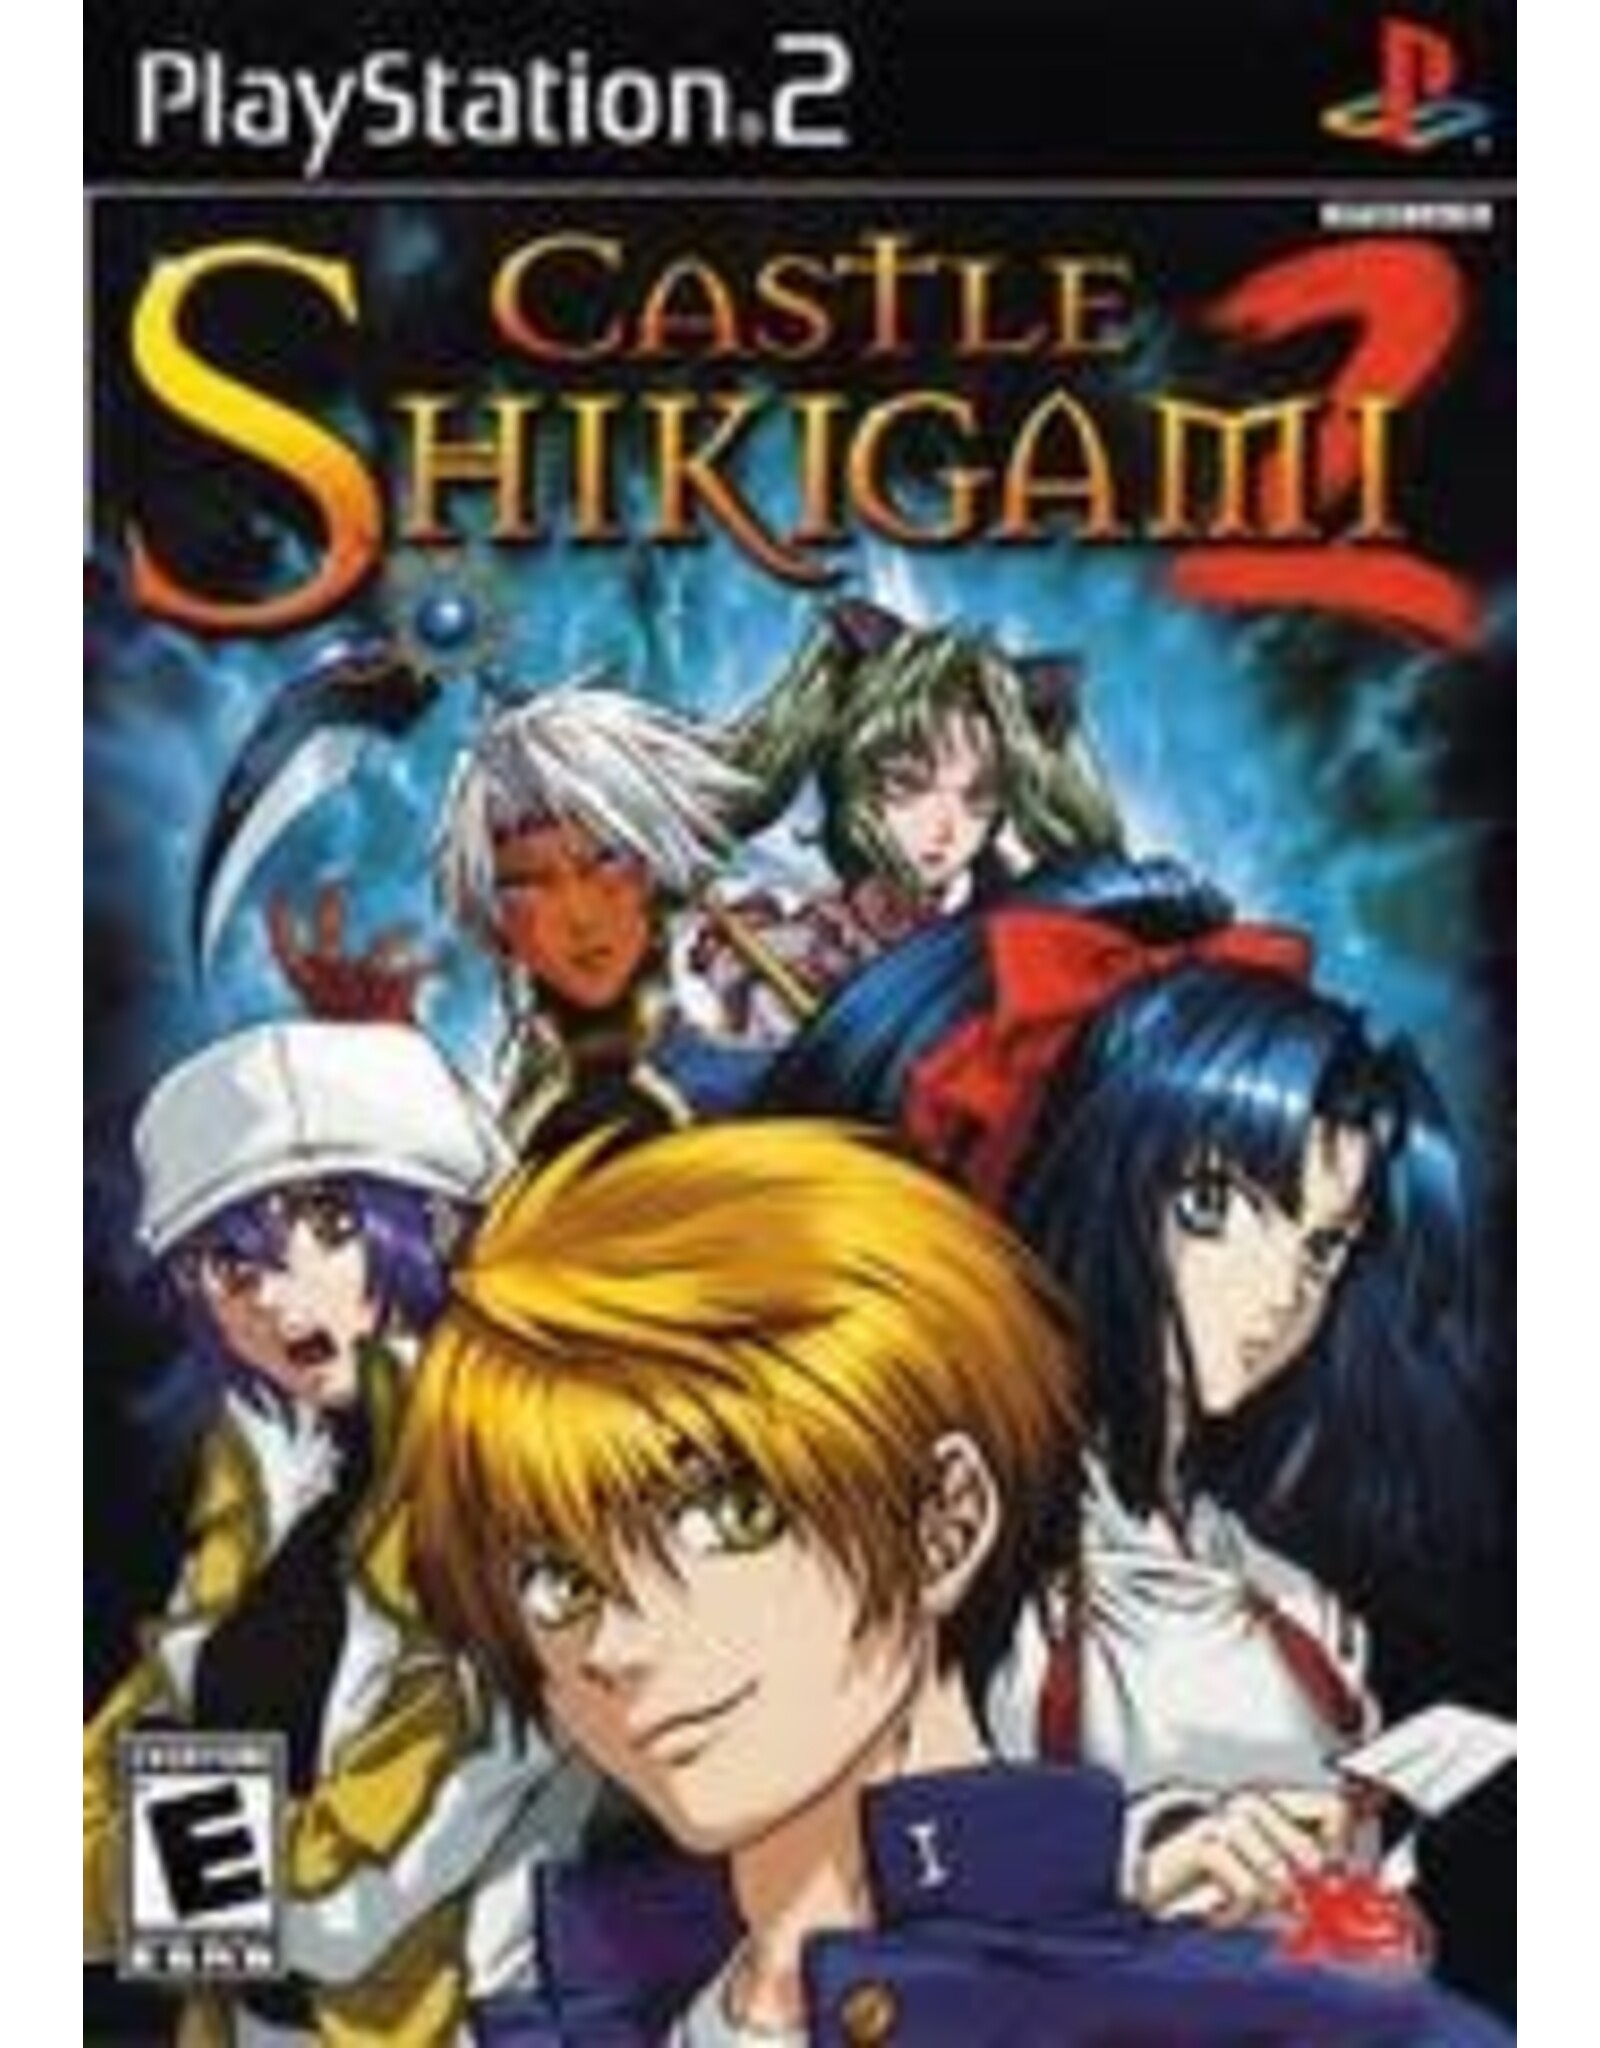 Playstation 2 Castle Shikigami 2 (No Manual, Damaged Label - Does not affect play)